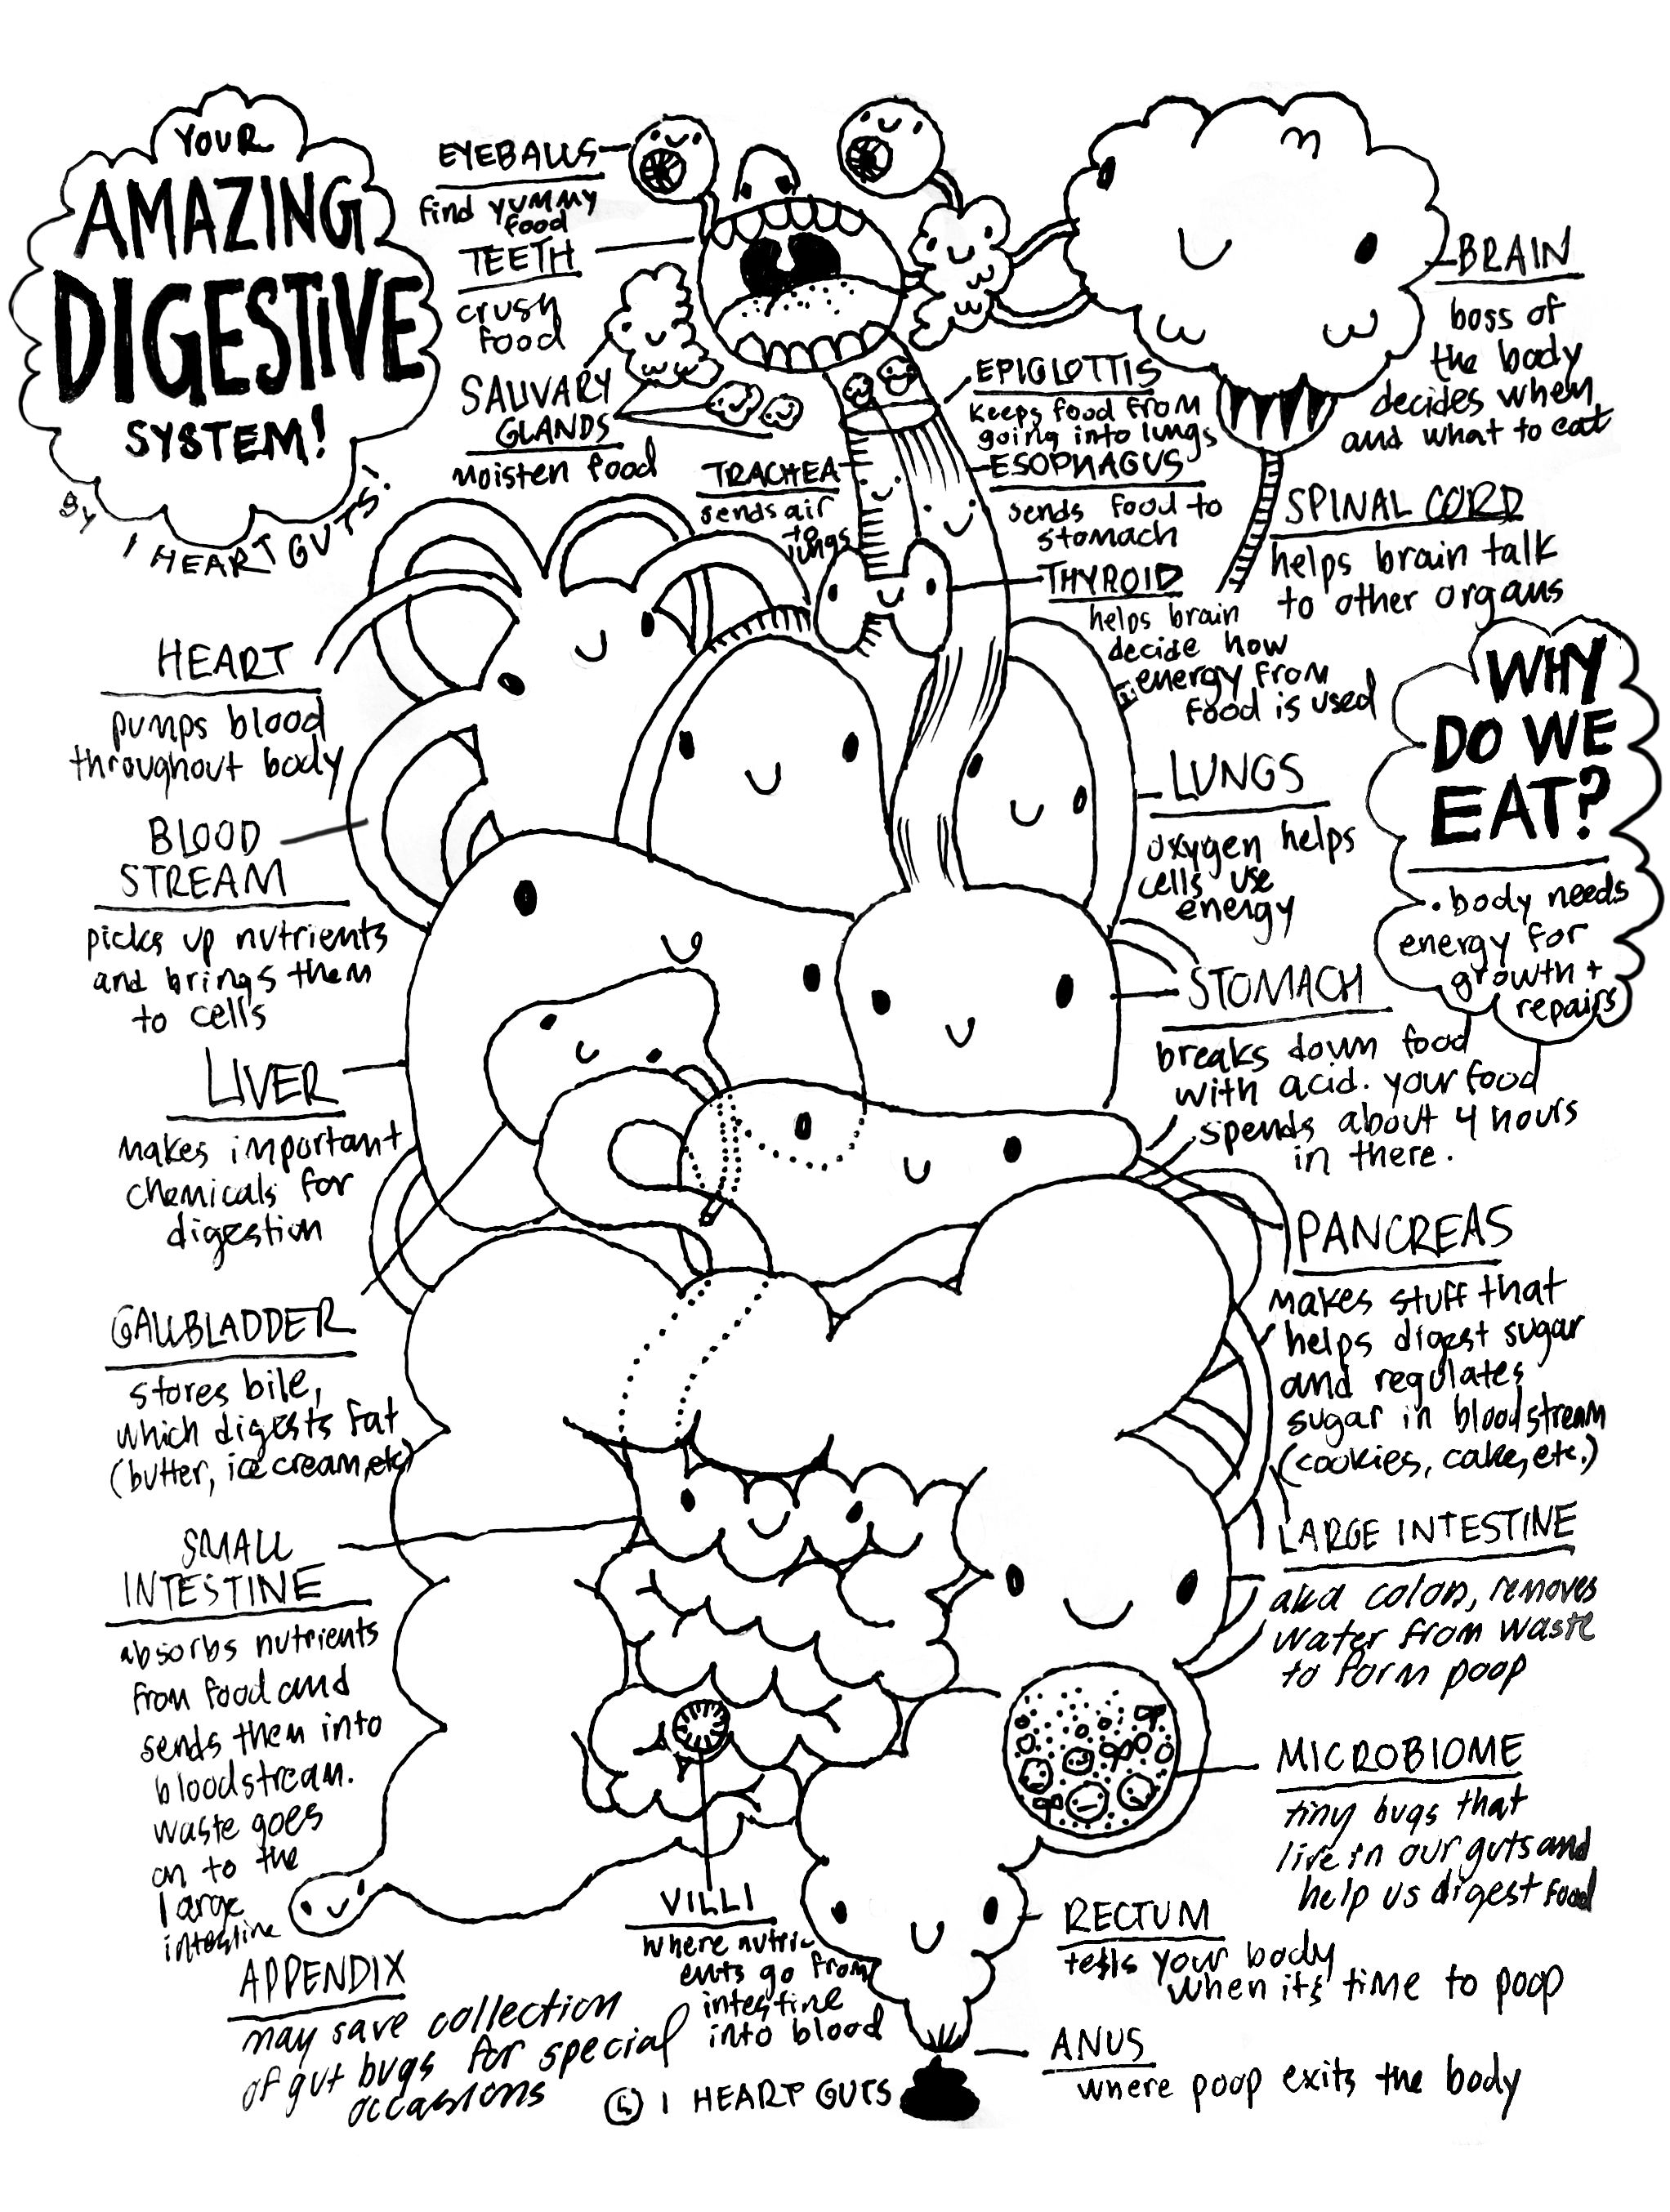 anatomy coloring page digestive system coloring page human body systems anatomy coloring page 